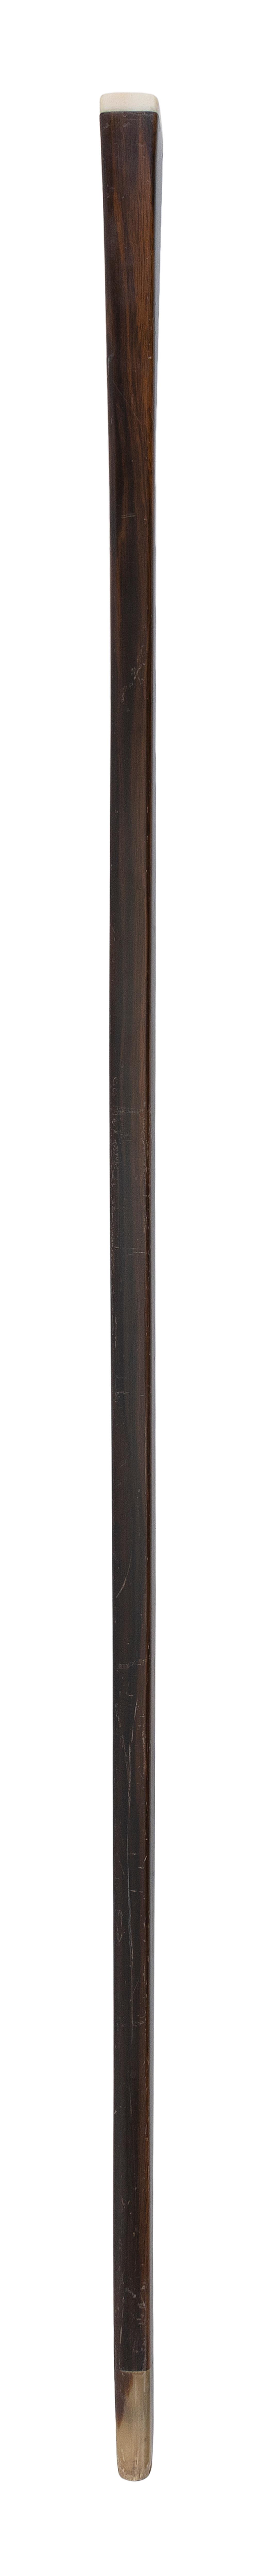 ENGLISH ROSEWOOD CANE WITH WHALE 30b6ab